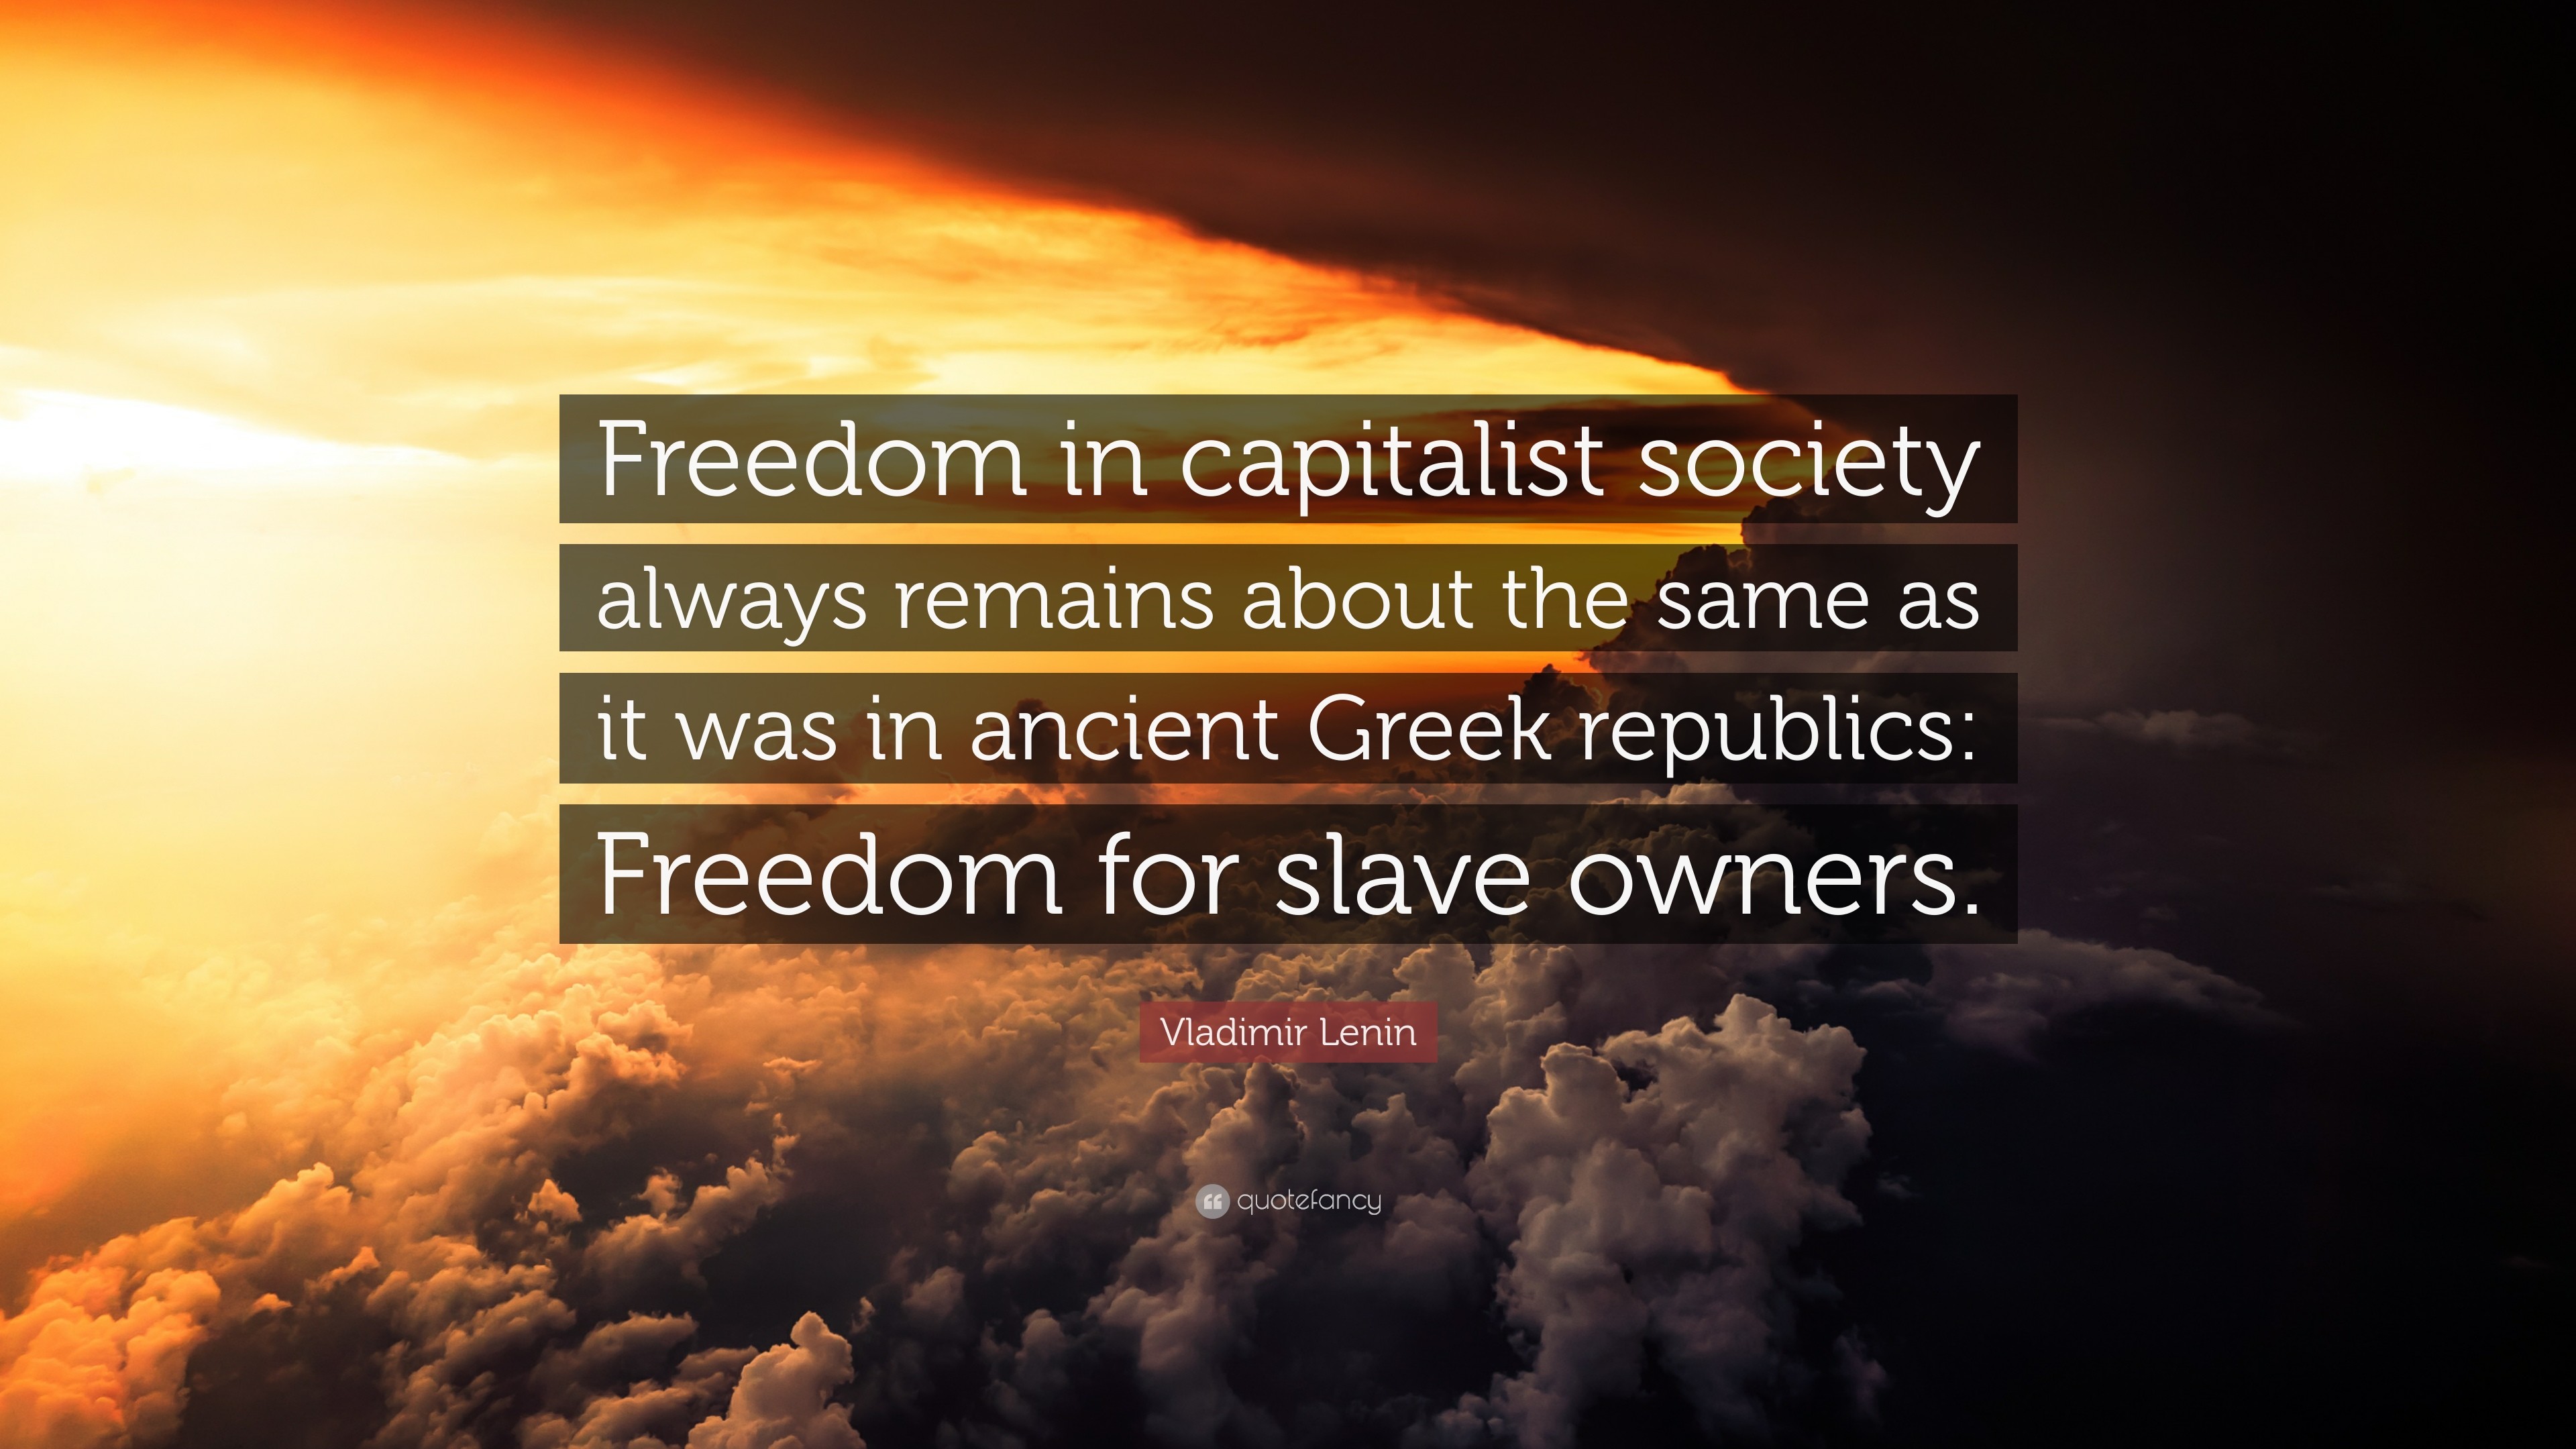 3840x2160 Vladimir Lenin Quote: “Freedom in capitalist society always remains about  the same as it